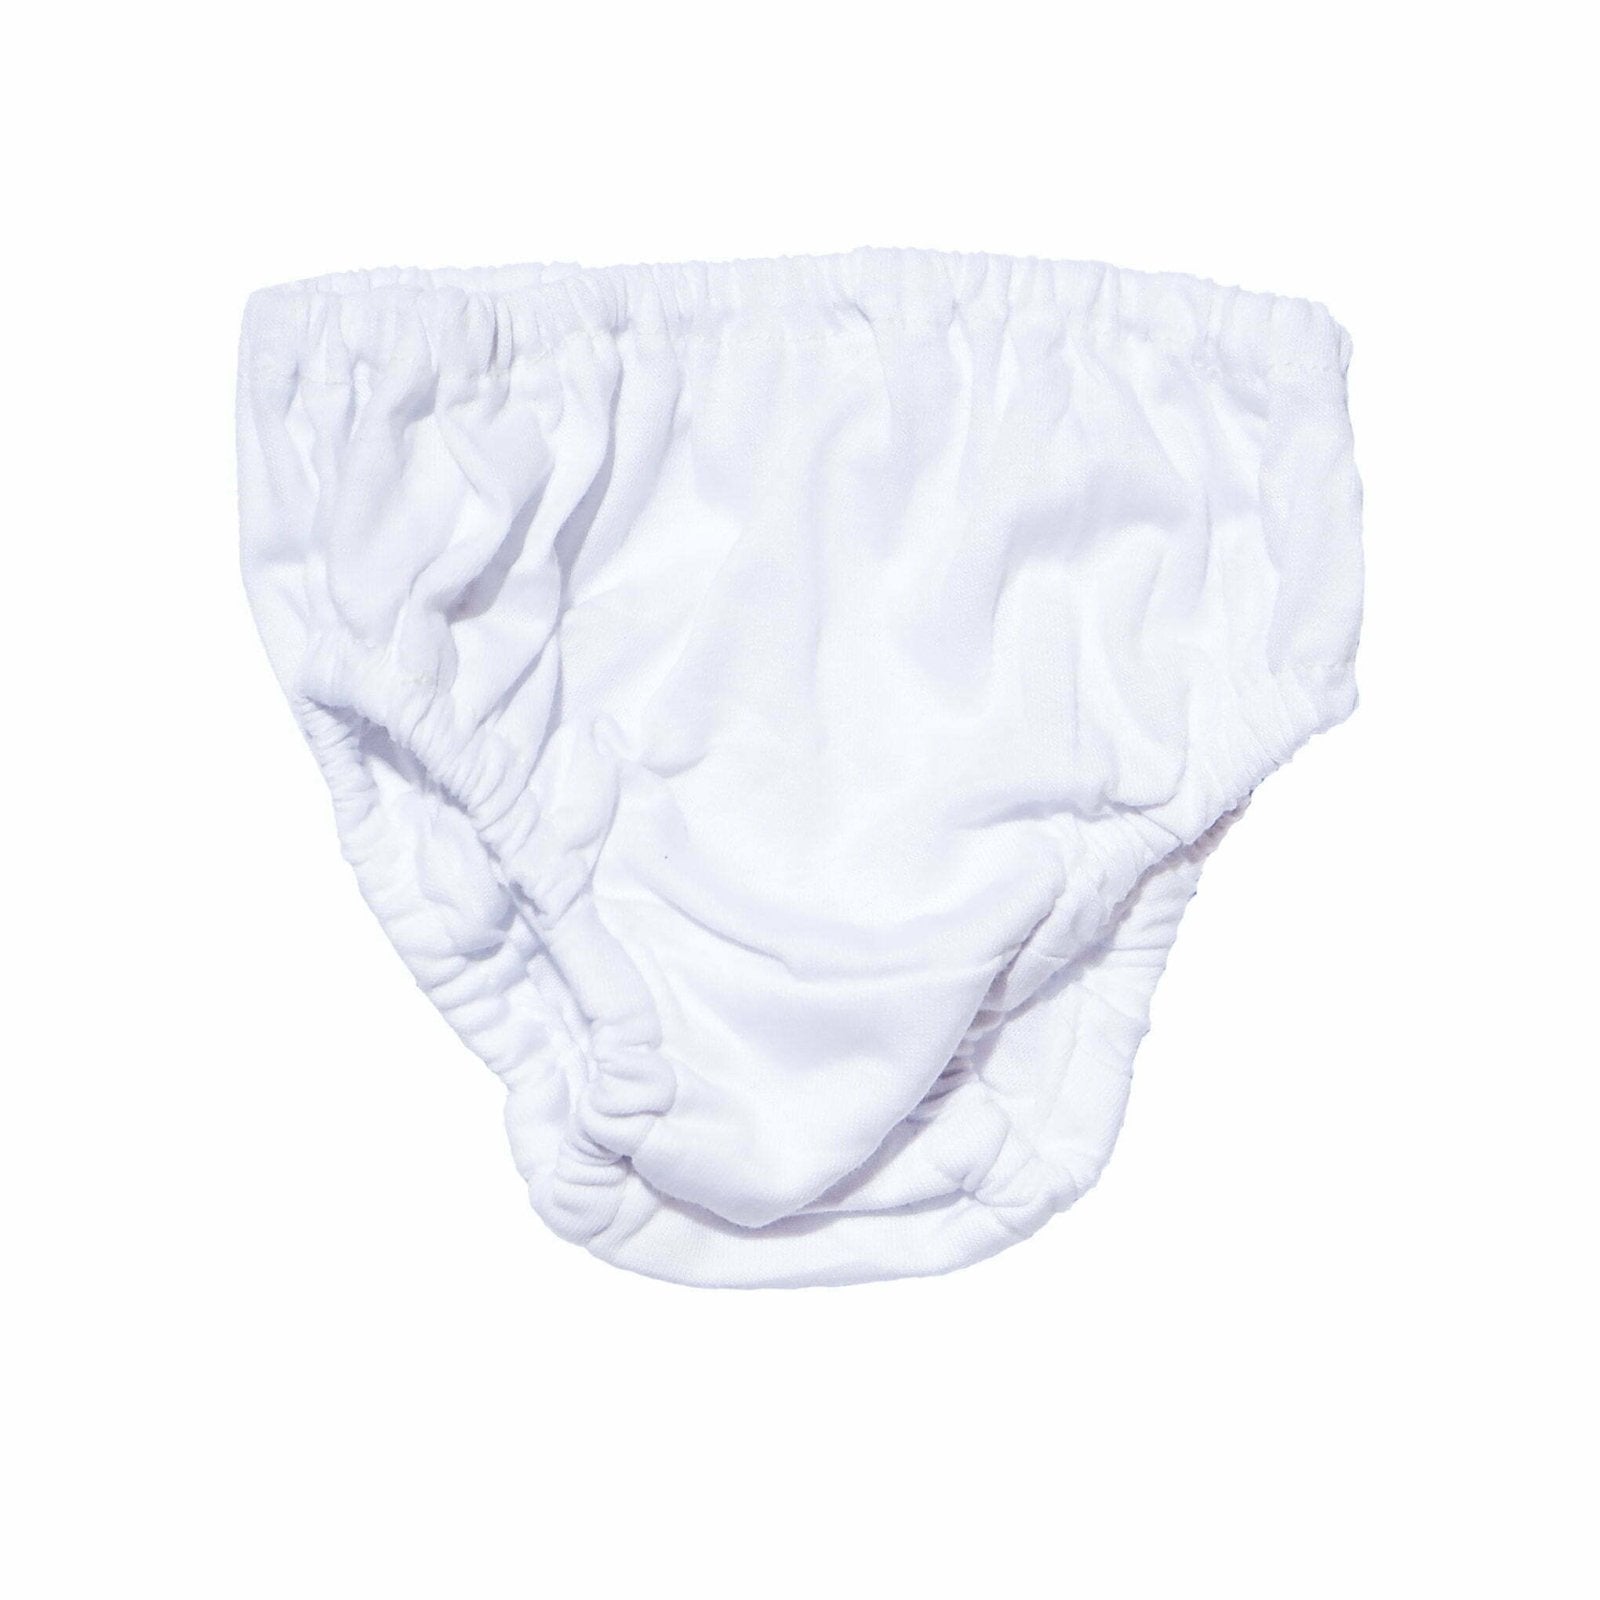 Panties For Babies Pack Of 6 by Little Darling